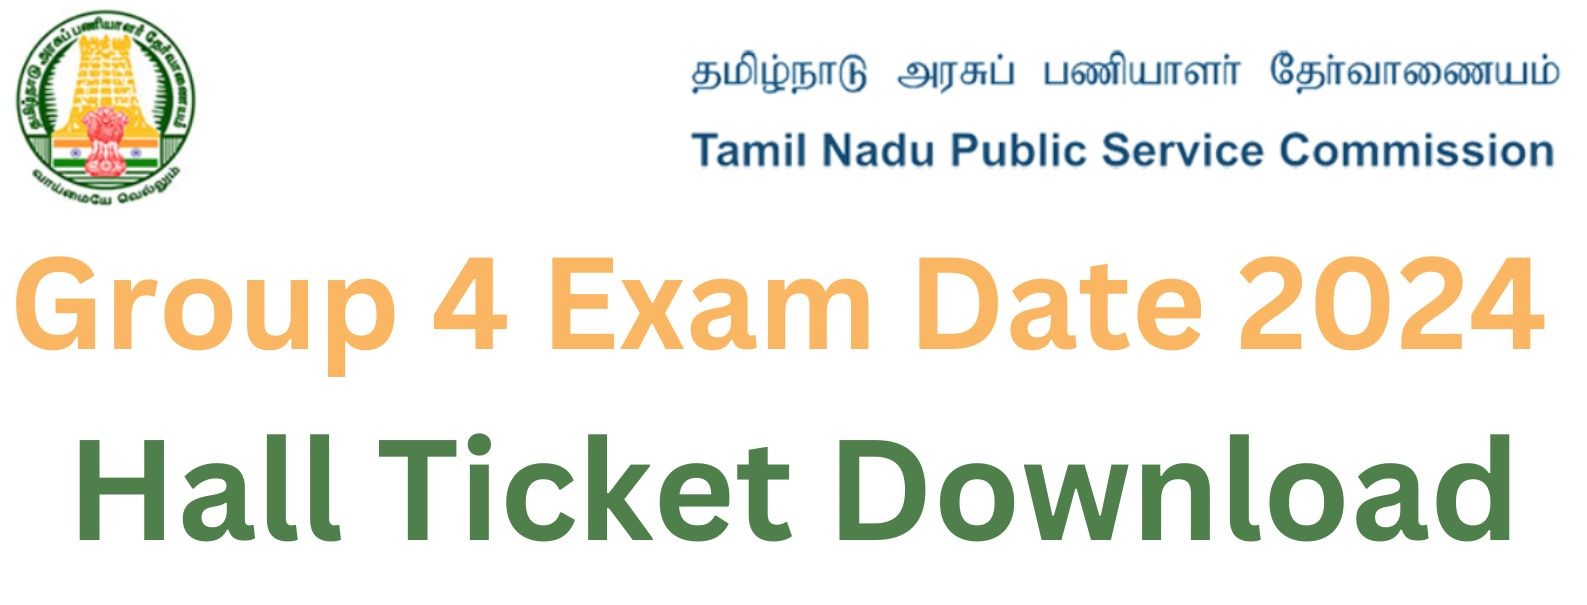 TNPSC Group 4 Exam Date 2024 And Hall Ticket Download From @www.tnpsc.gov.in